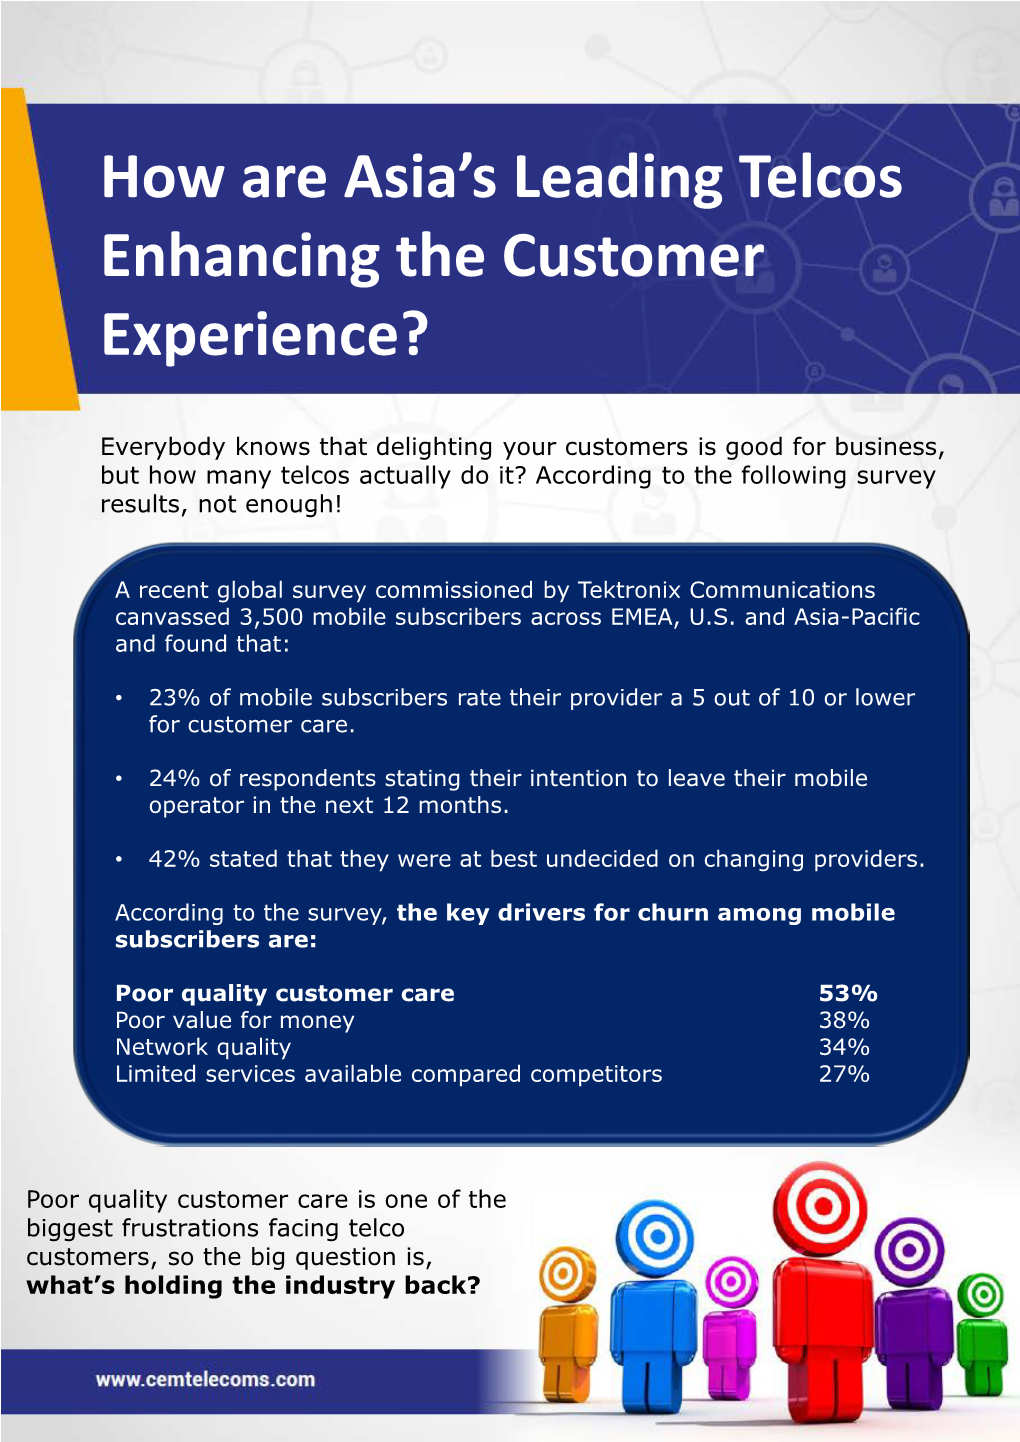 How Are Asia's Leading Telcos Enhancing the Customer Experience?